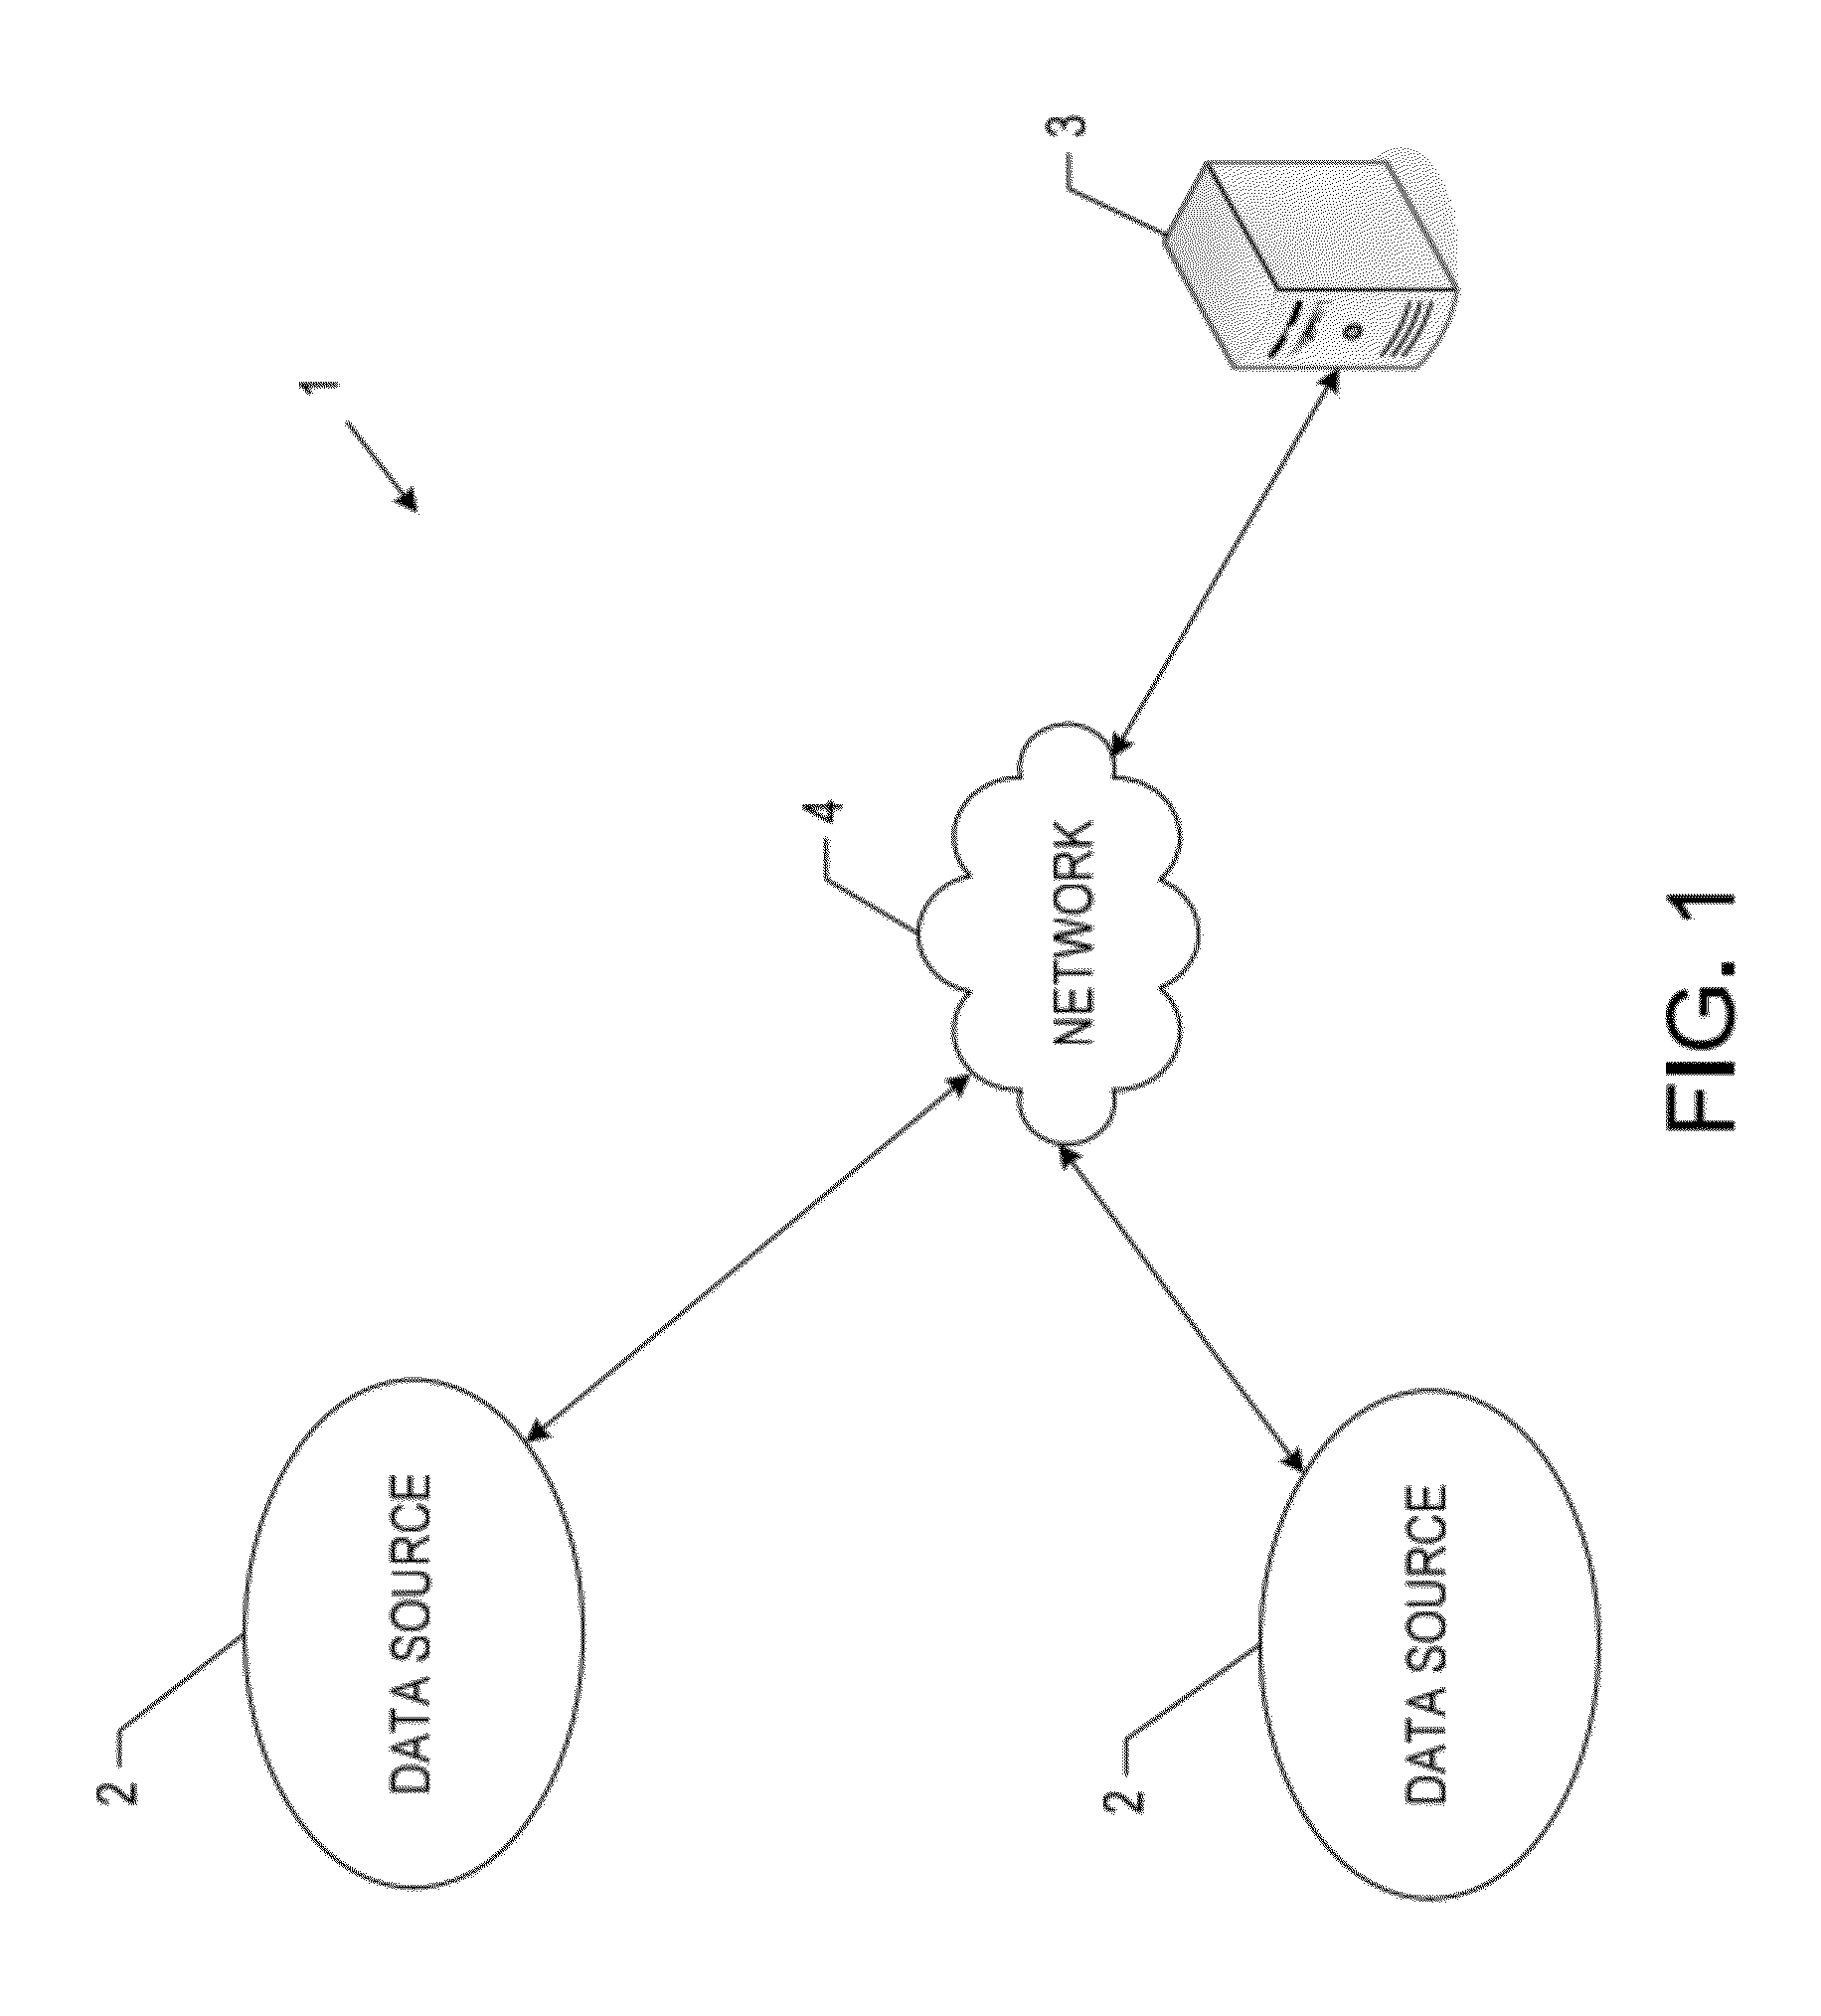 Systems and methods for updating maps based on telematics data